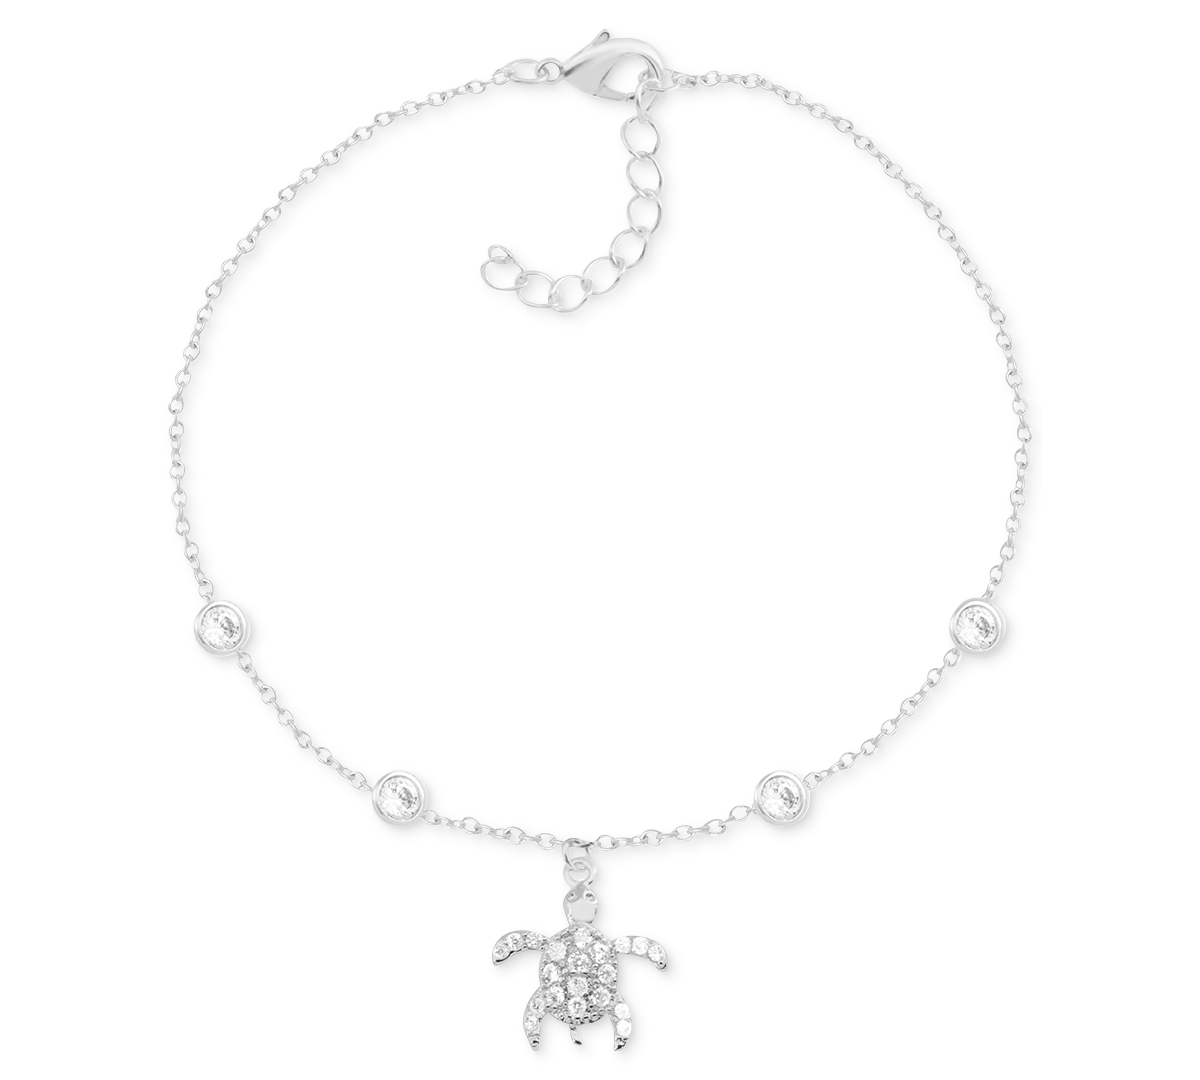 Crystal Sea Turtle Anklet in Silver-Plate - Silver